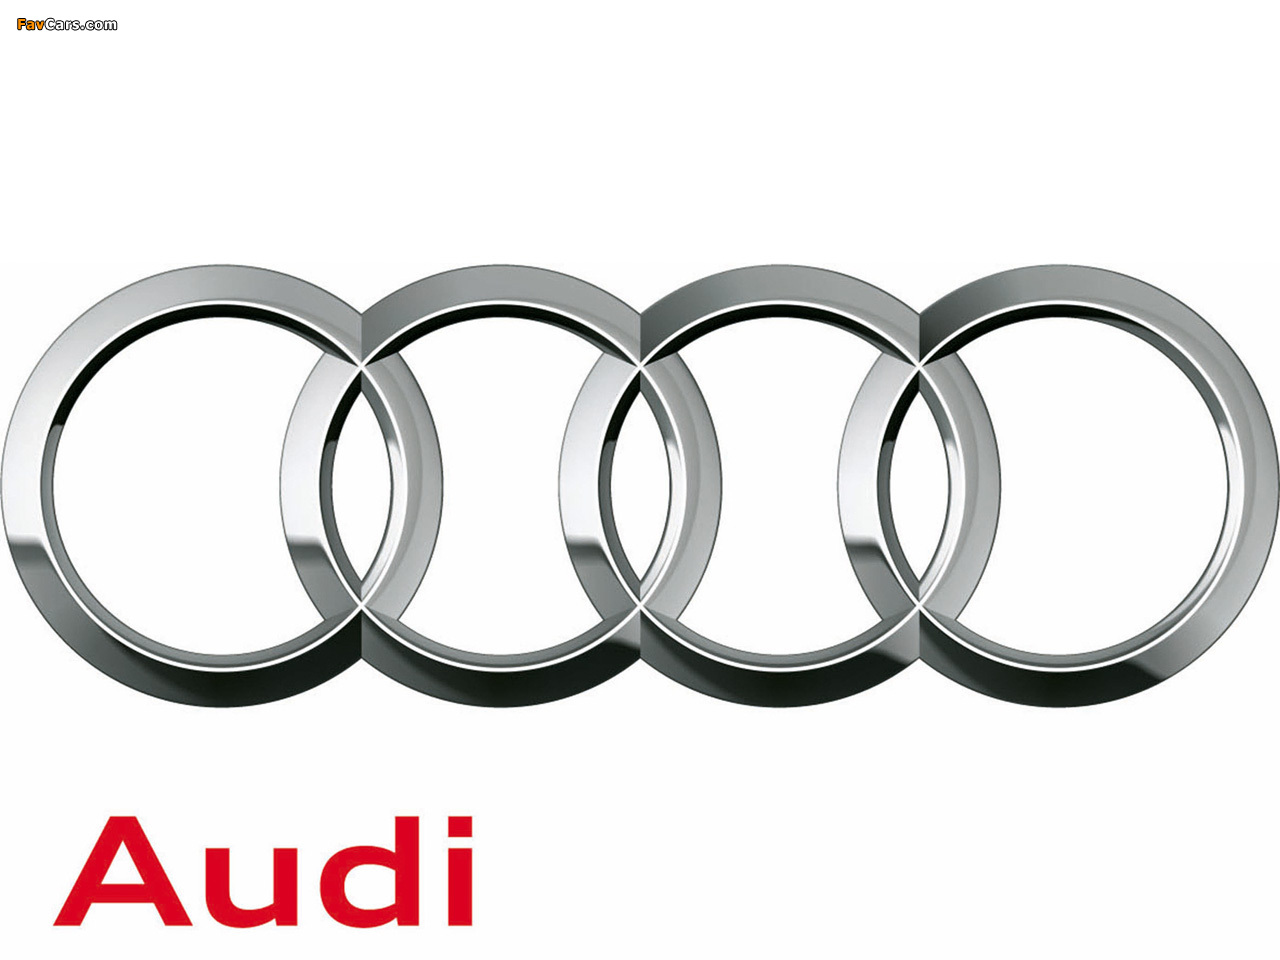 Pictures of Audi (1280 x 960)